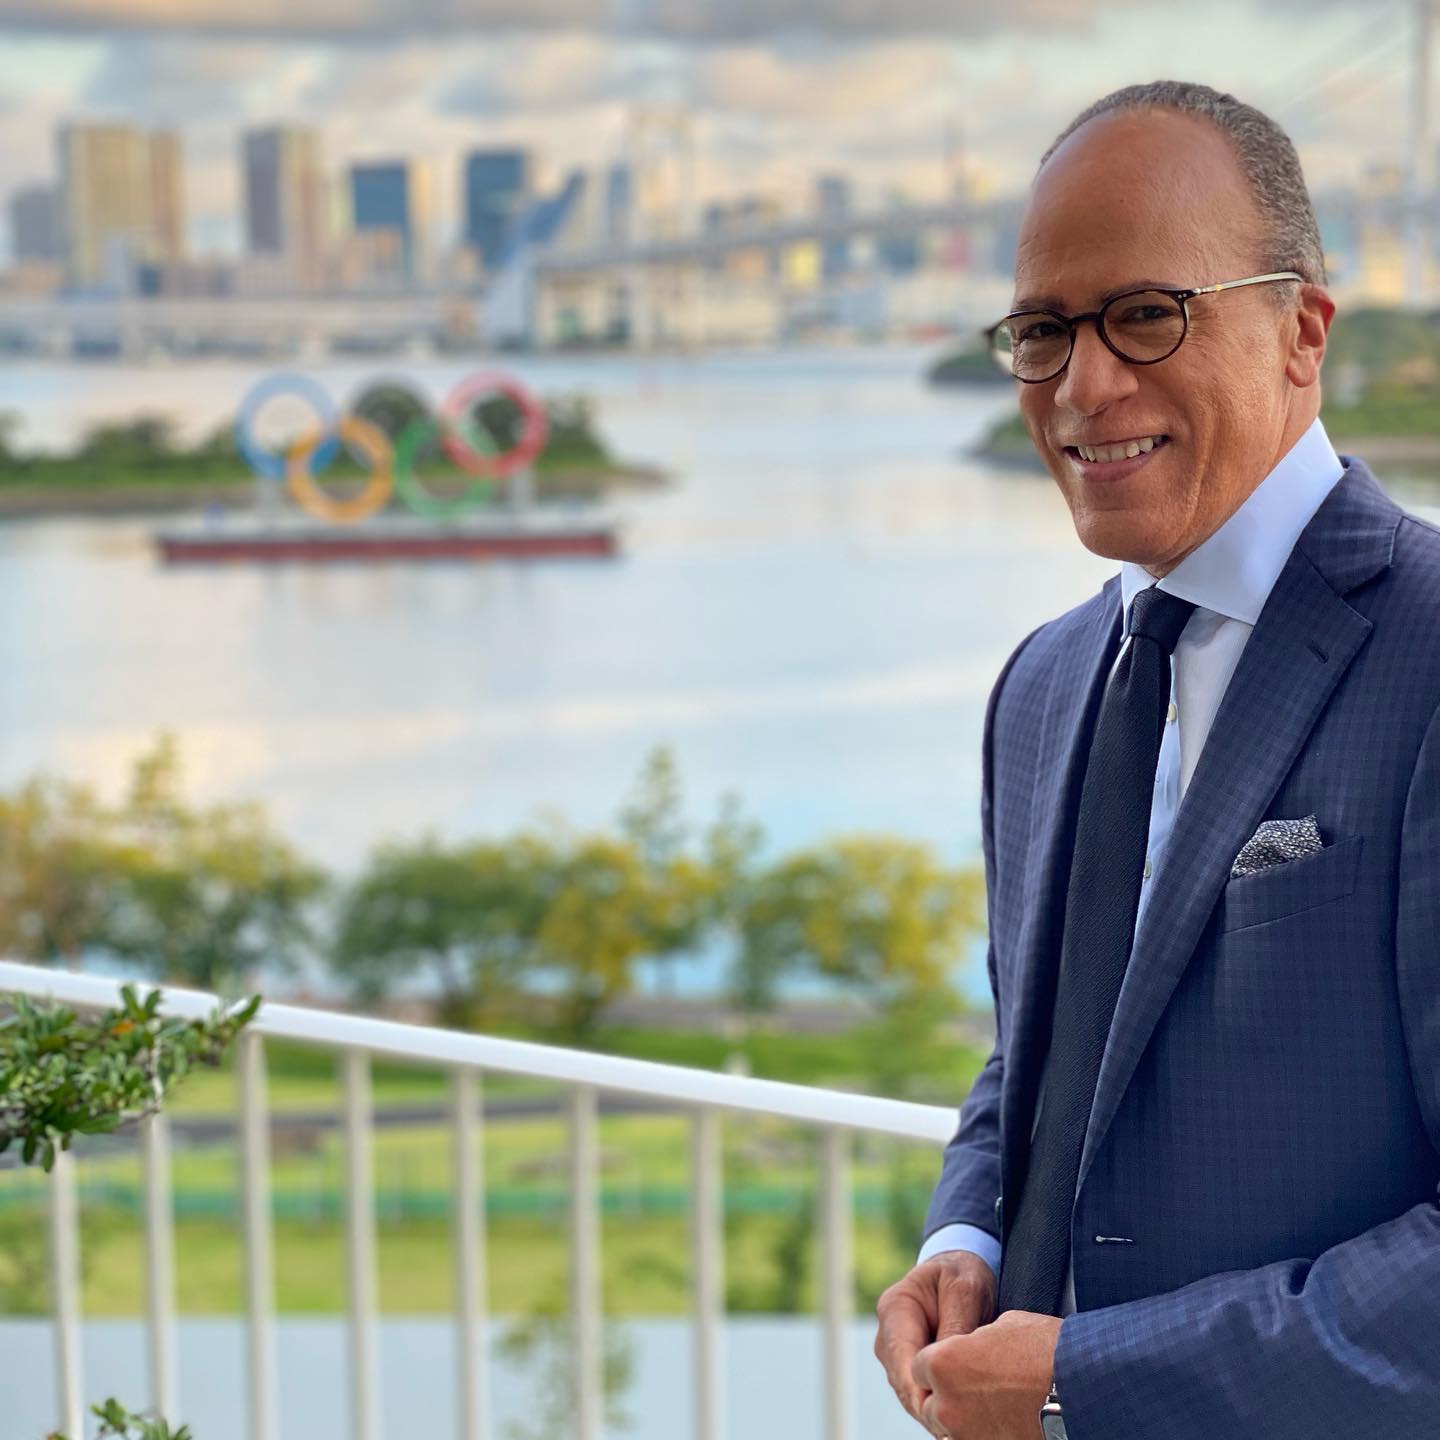 Lester Holt Biography: Wife, Age, Children, Net Worth, Parents, Wikipedia, Height, Ethnicity, Illnesses, Family